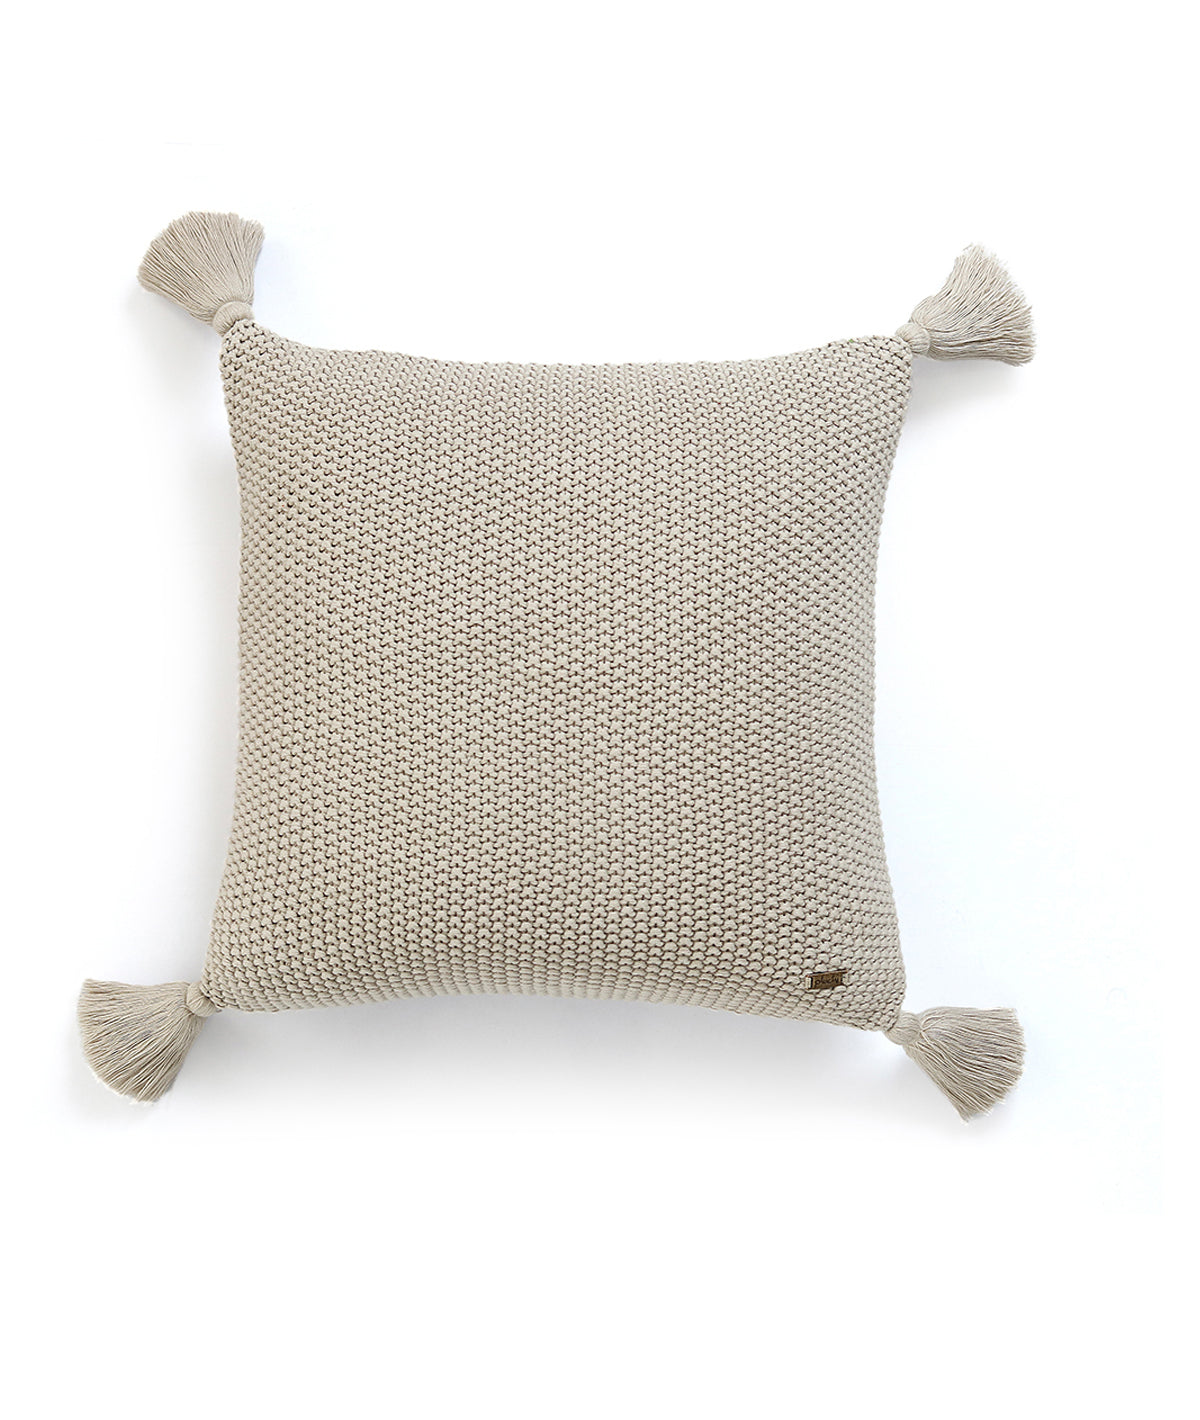 Moss Knit Cotton Knitted Decorative Cushion Cover (Pale Whisper) (16" X 16")